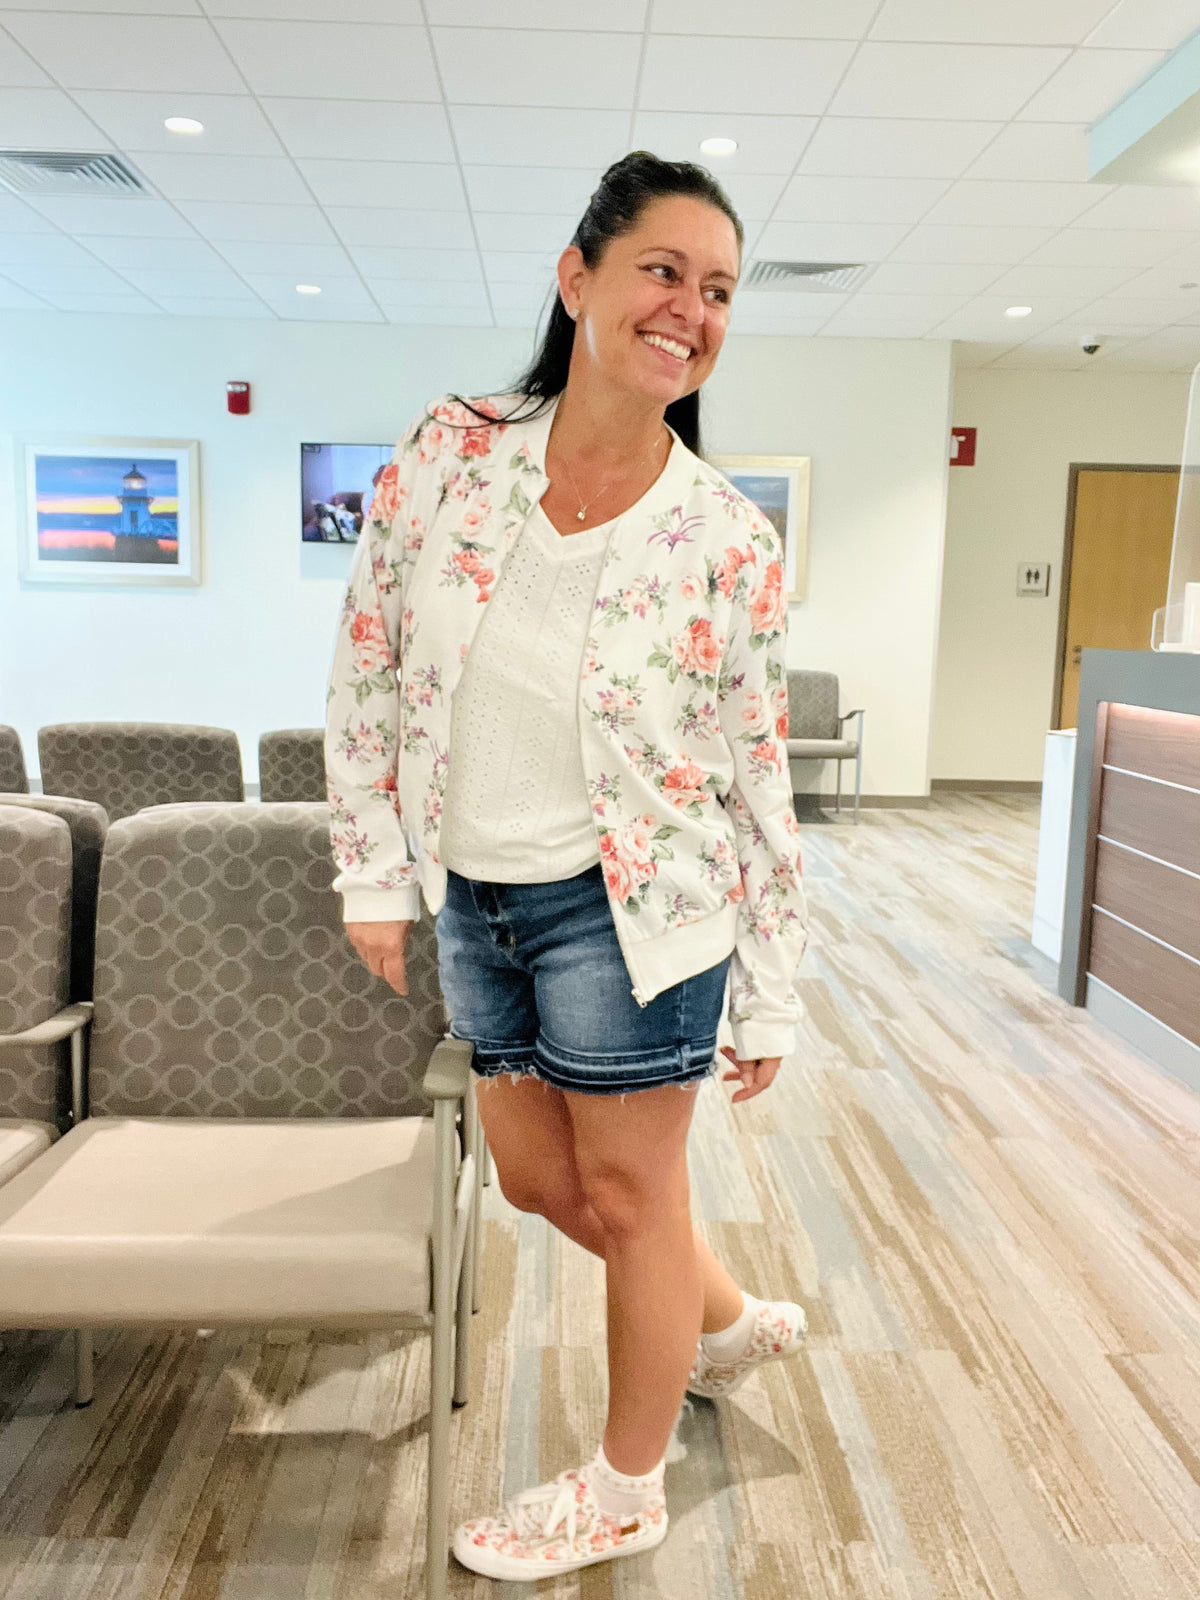 Brunette Woman standing & smiling while looking over her shoulder wearing a white floral zip up lightweight floral bomber jacket unzipped over a white eyelet v-neck top paired with denim shorts and floral sneakers